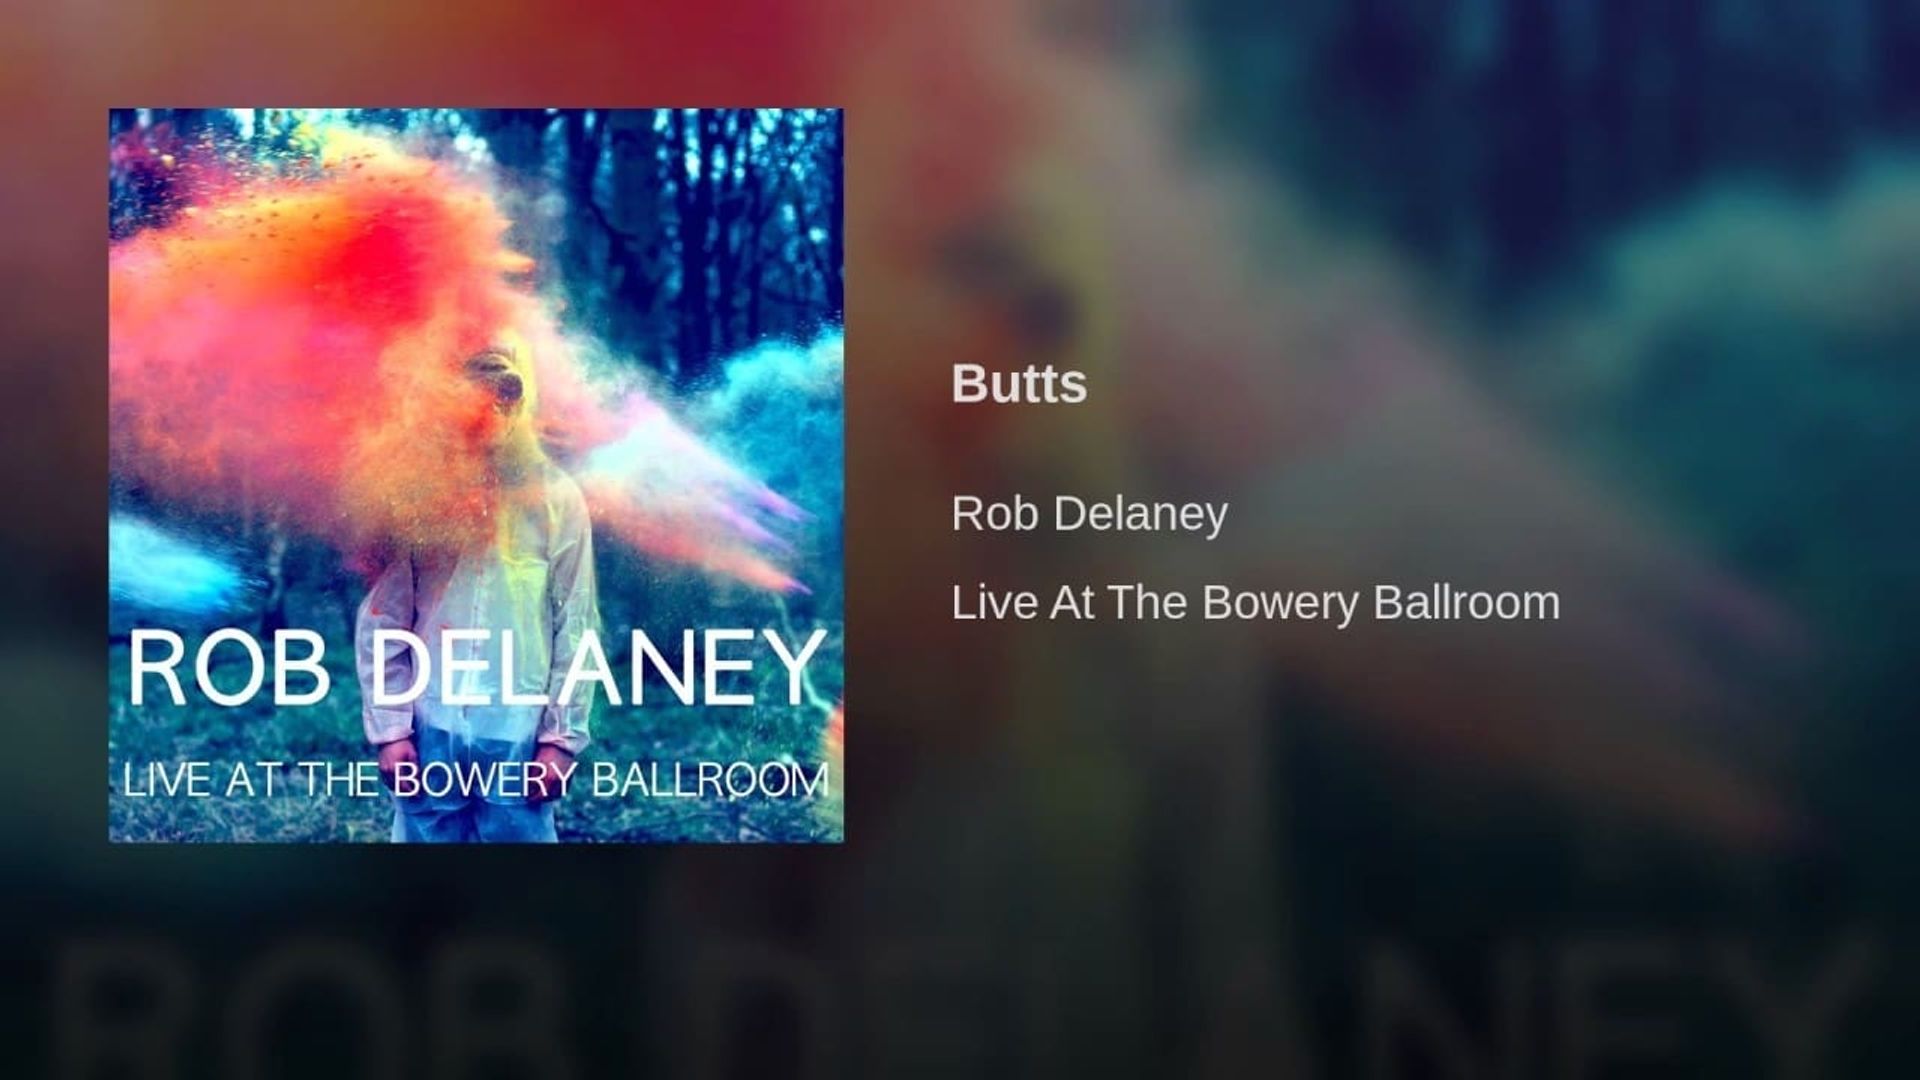 Rob Delaney Live at the Bowery Ballroom background